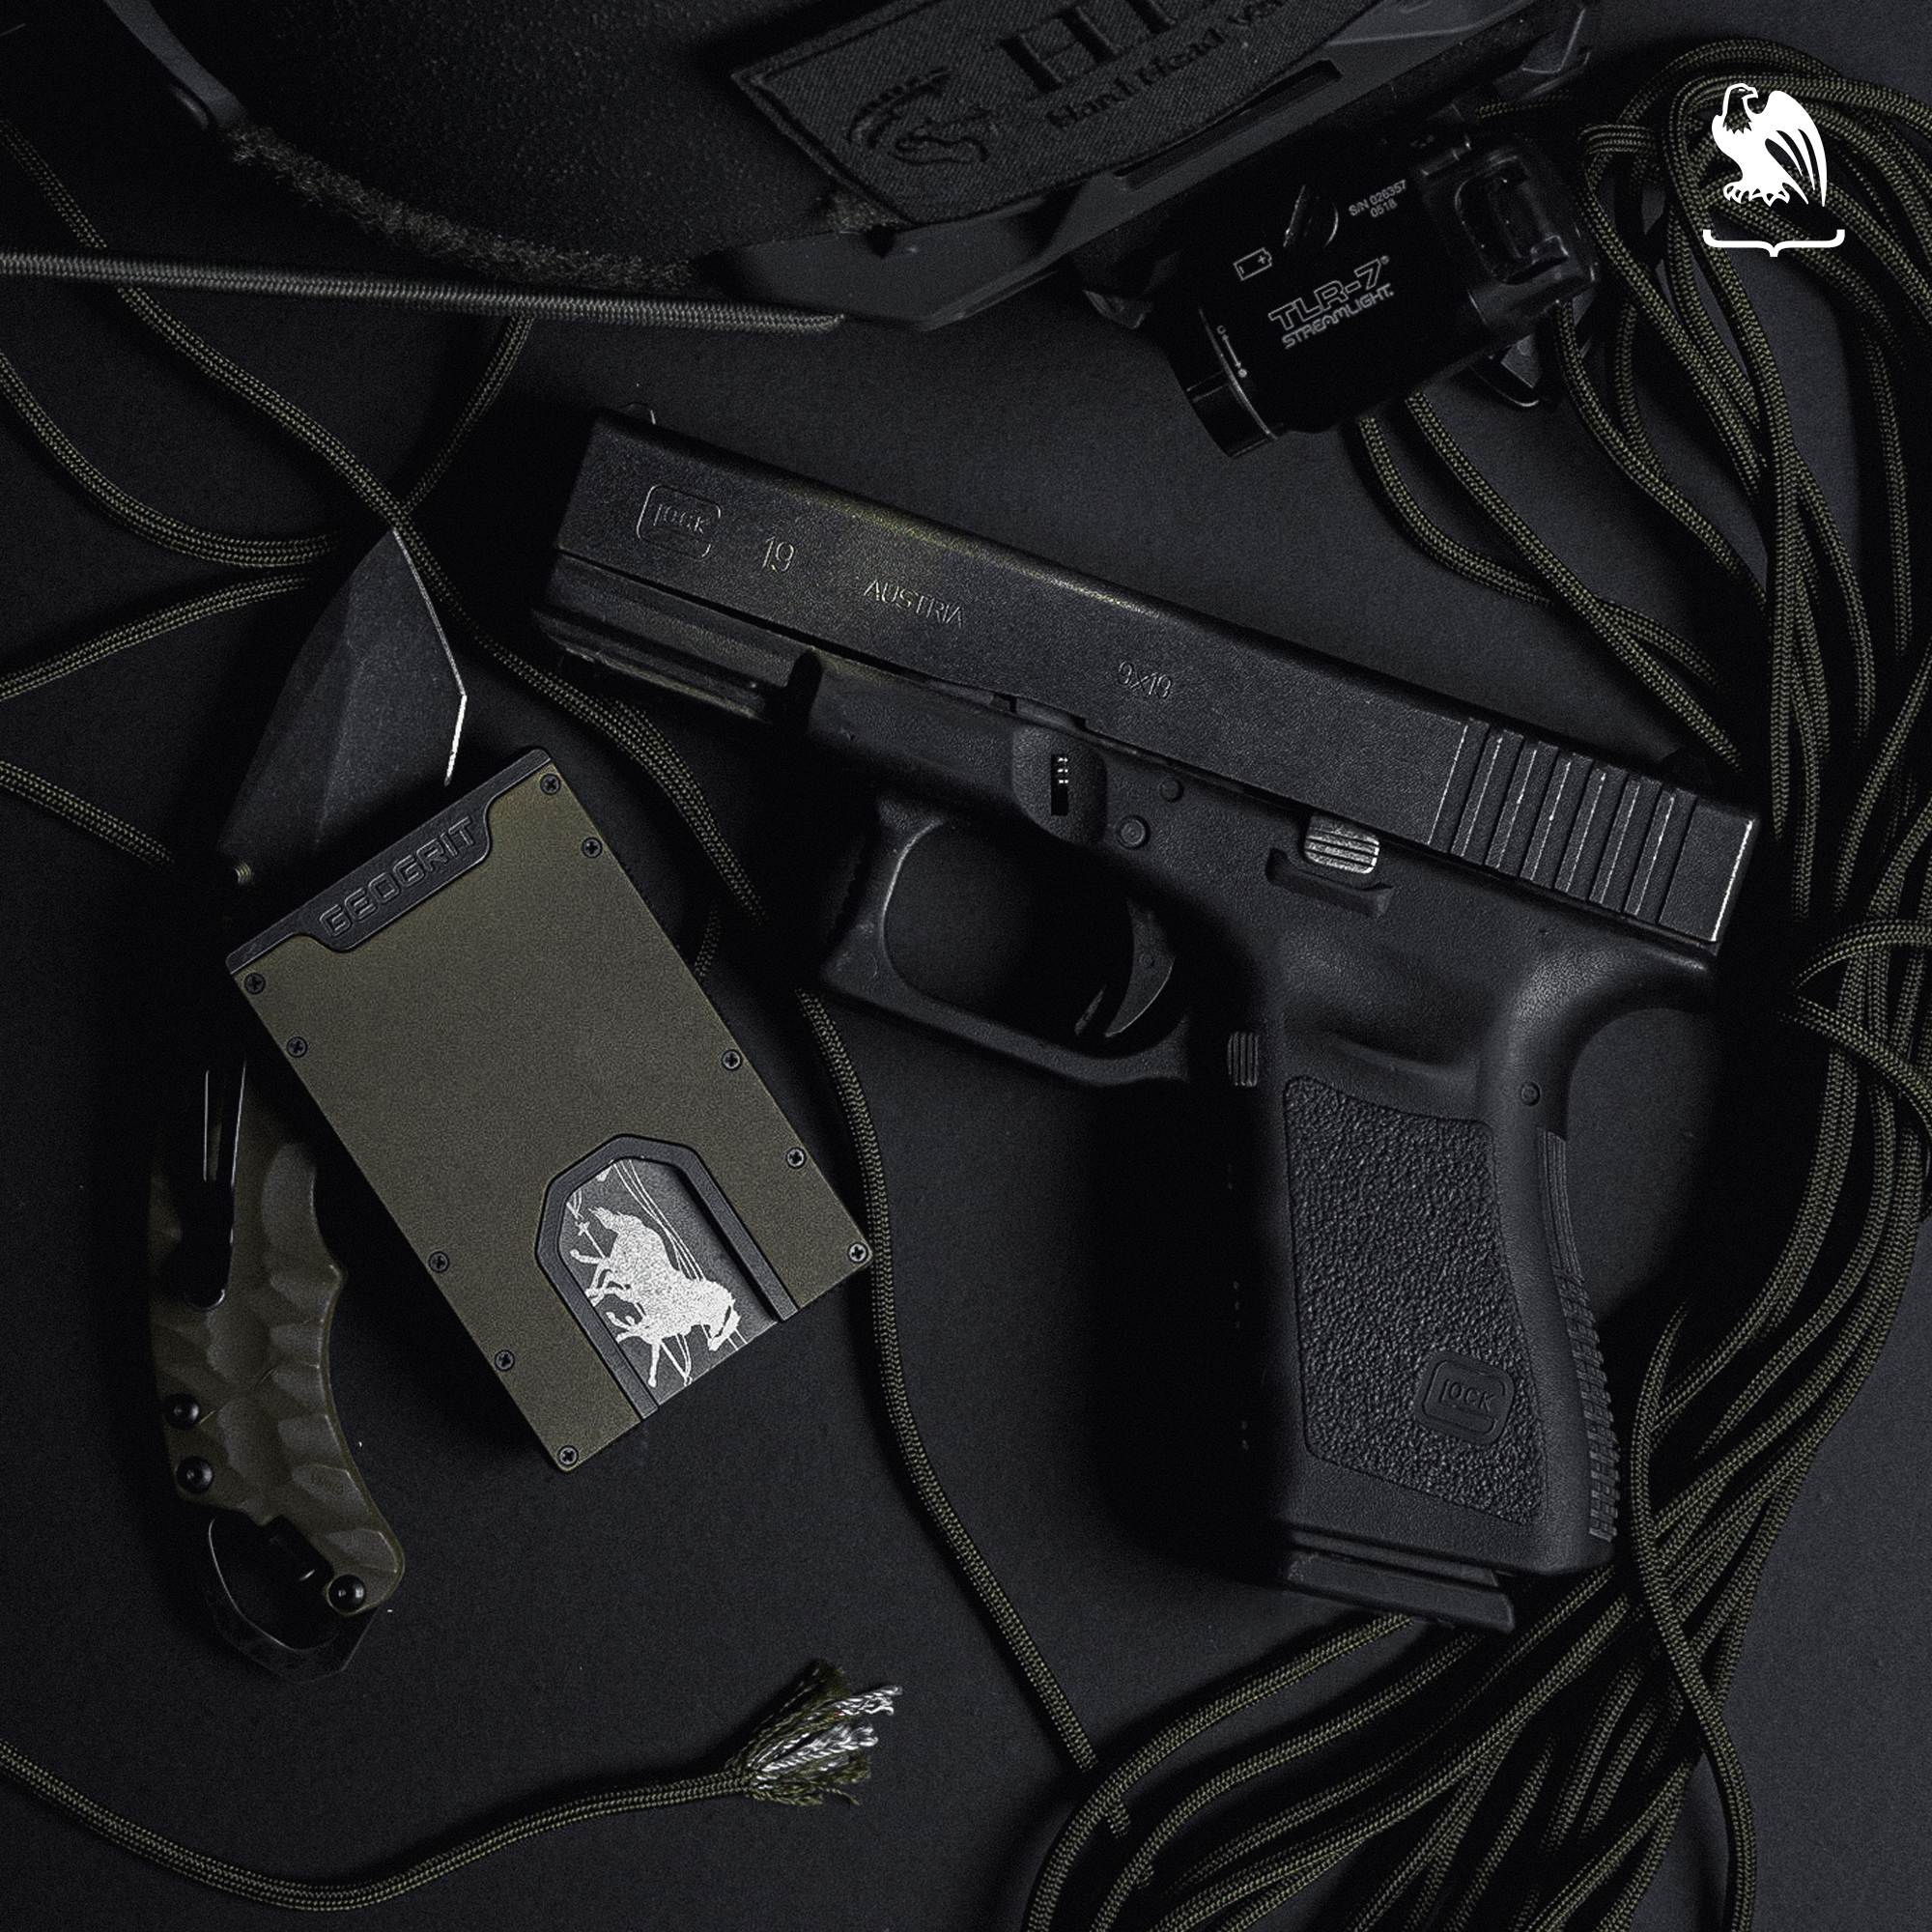 Glock 19 pistol next to Geogrit slim wallet and other items